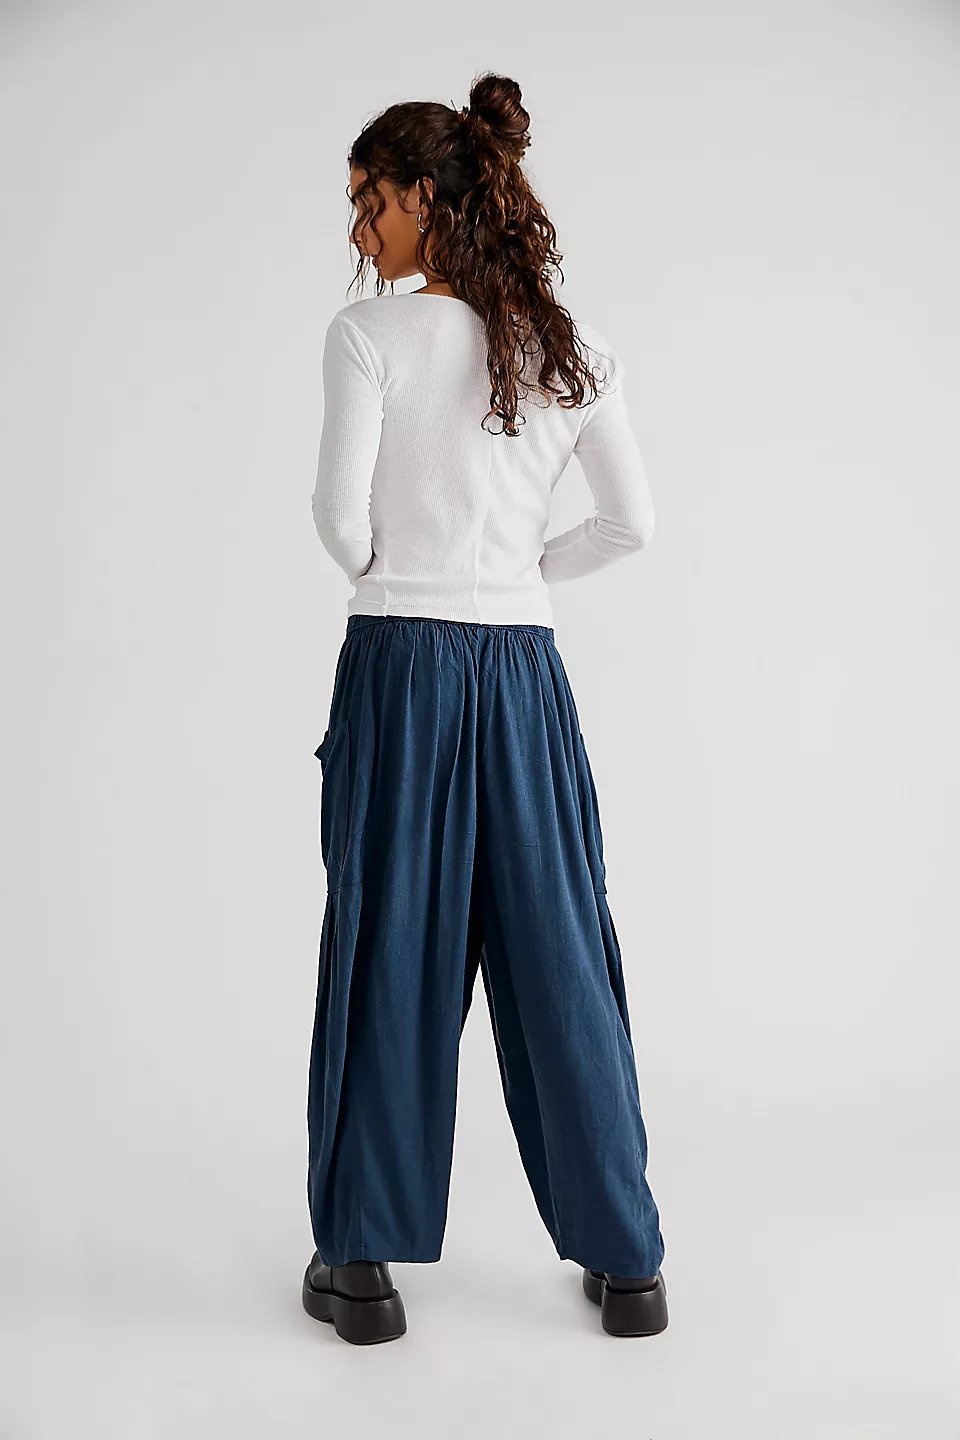 ❤️LAST DAY 70% OFF - Quinn Plus Size Pants (Buy 2 Get Extra 10% OFF)